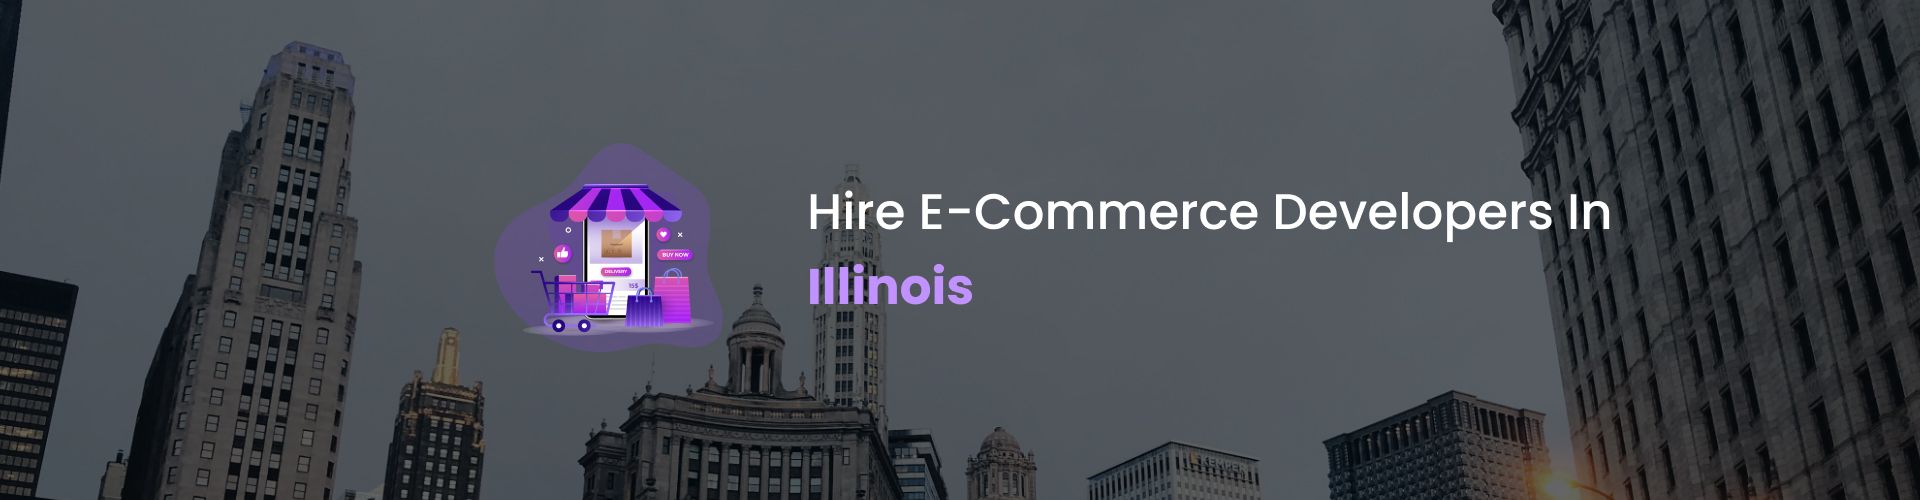 hire ecommerce developers in illinois